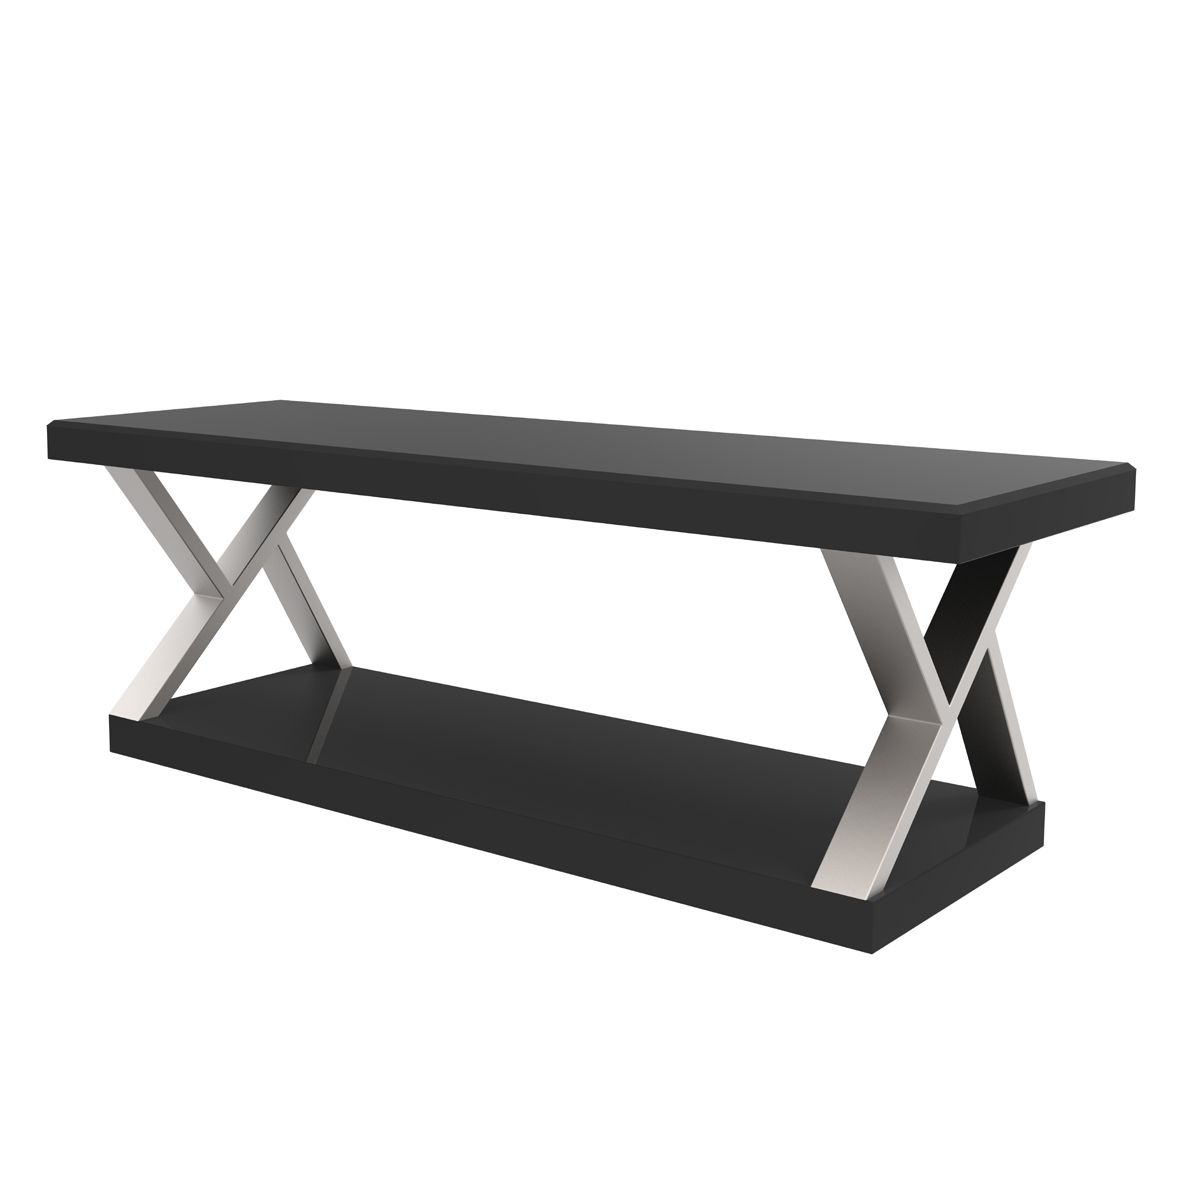 Ryan Rove Hayden Double V Design 60 Inch Modern Tv Stand Throughout Well Known Modern Tv Stands (View 20 of 20)